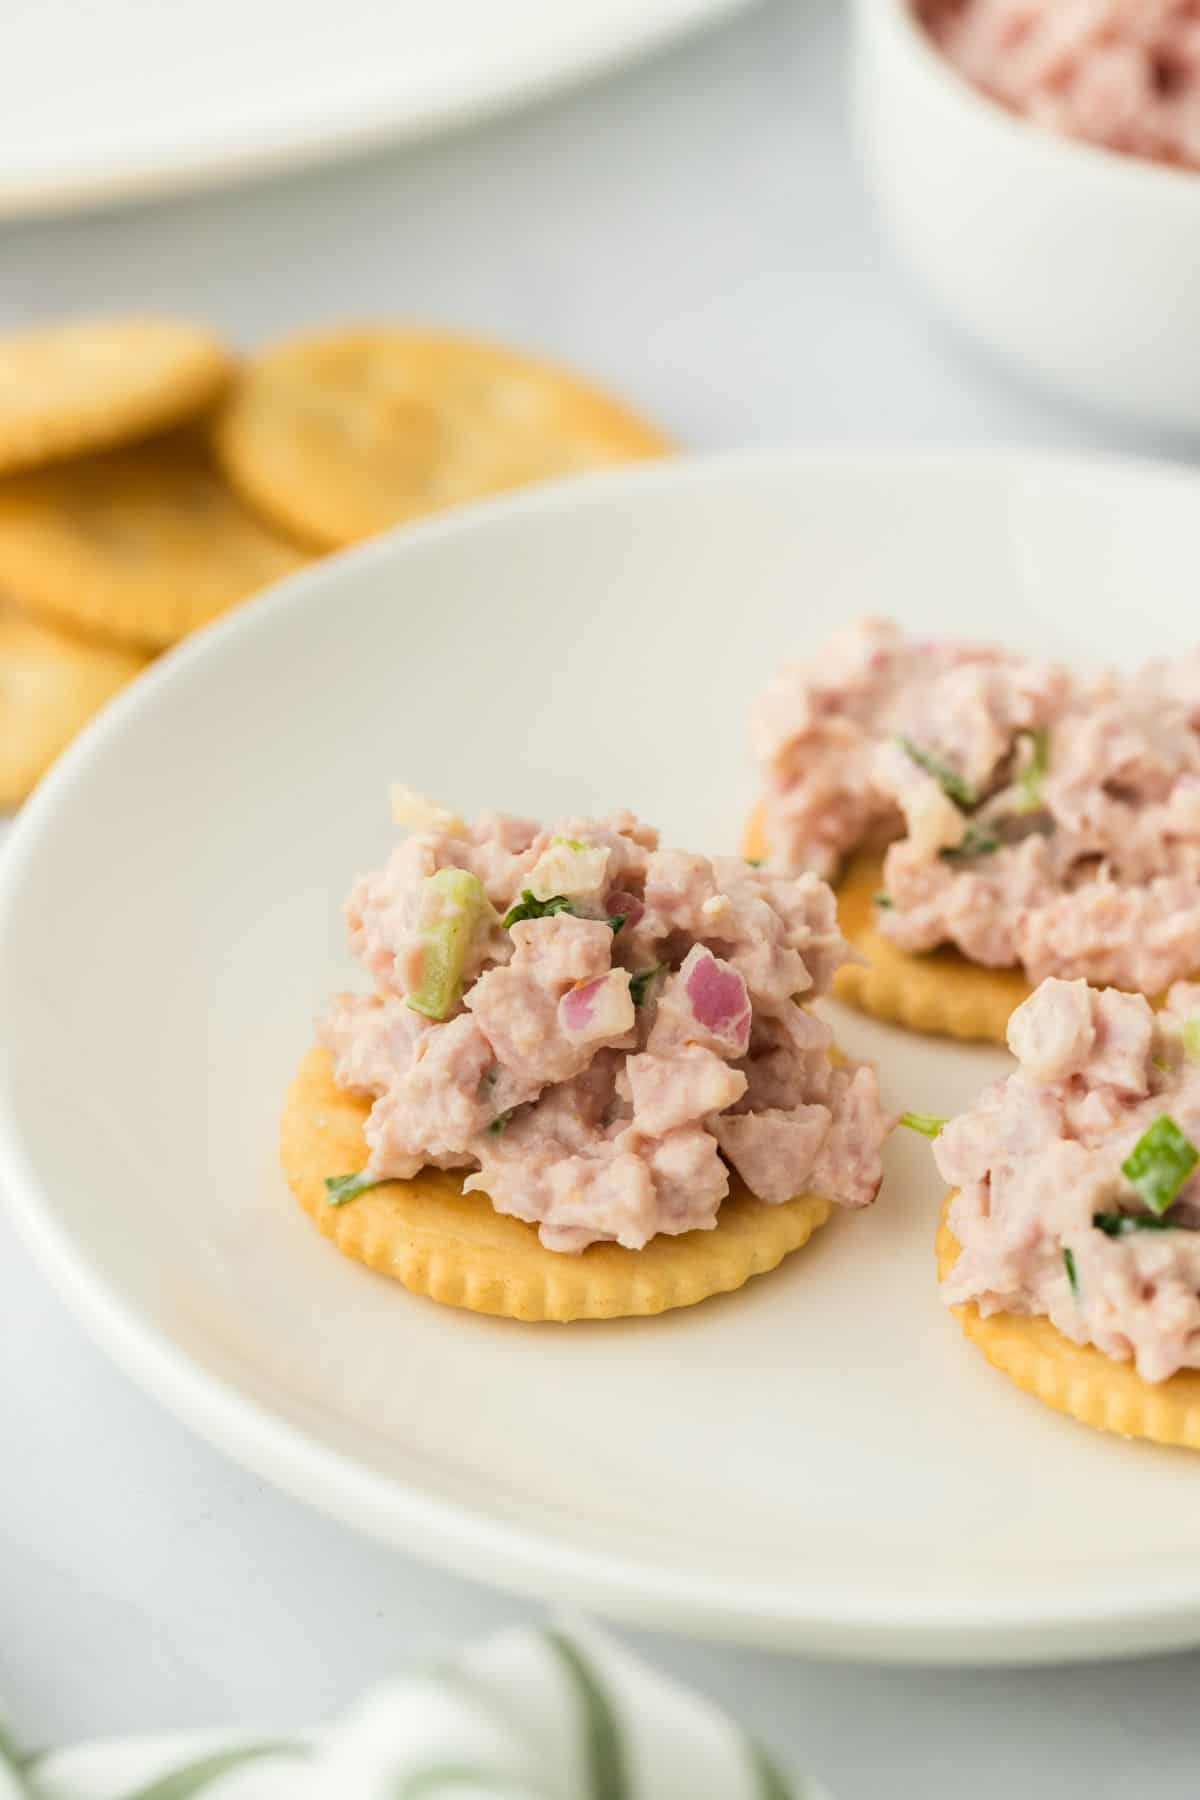 Three round crackers topped with deviled ham, placed on a white plate. Behind them is a bowl with more ham and additional crackers